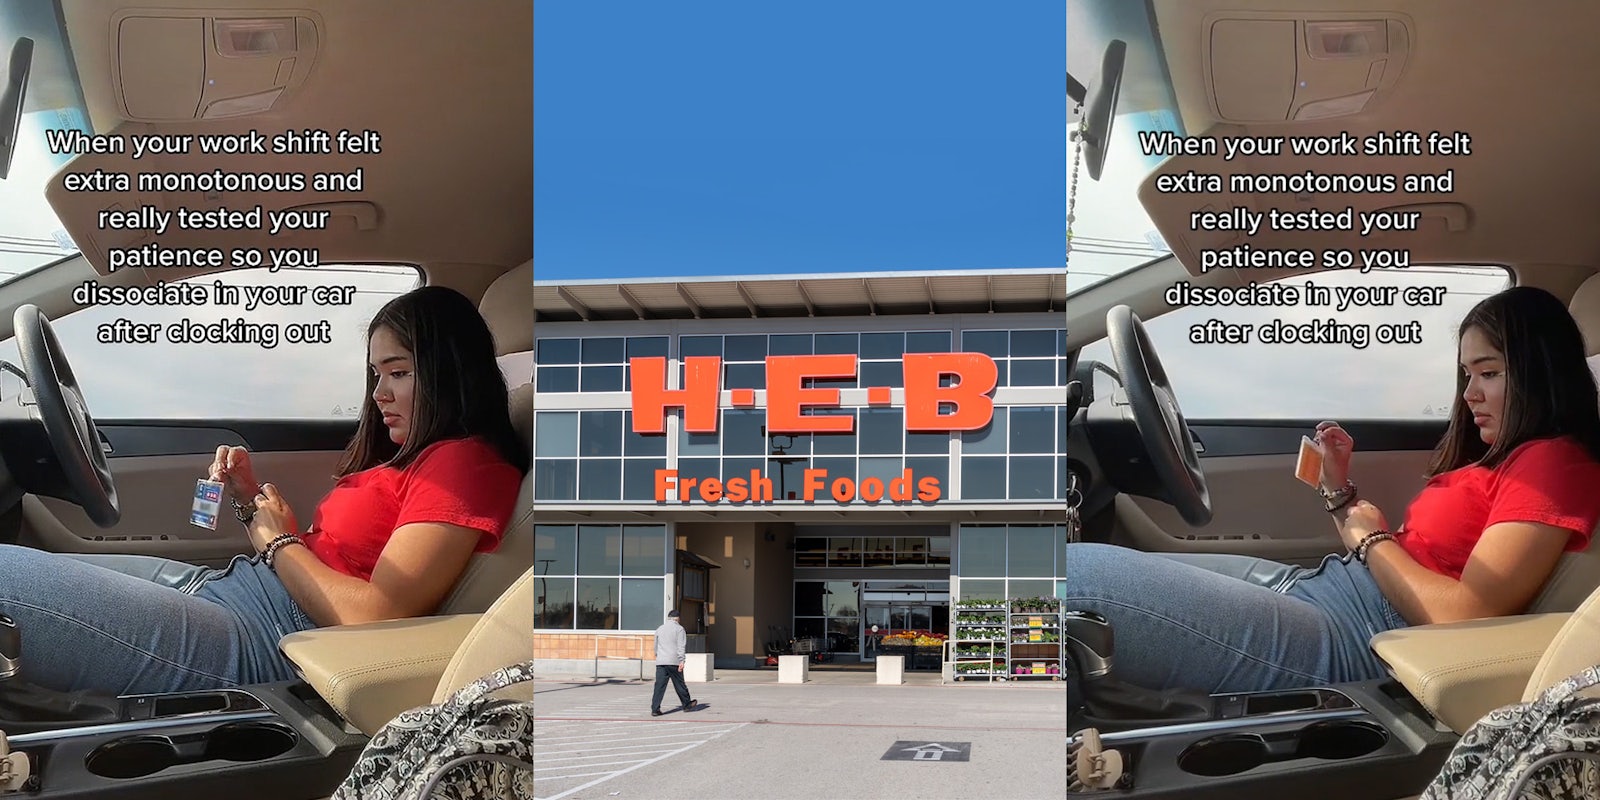 HEB employee sitting in car holding name tag caption 'When your work shift felt extra monotonous and really tested your patience so you disassociate in your car after clocking out' (l) HEB supermarket building and parking lot (c) HEB employee sitting in car holding name tag caption 'When your work shift felt extra monotonous and really tested your patience so you disassociate in your car after clocking out' (r)